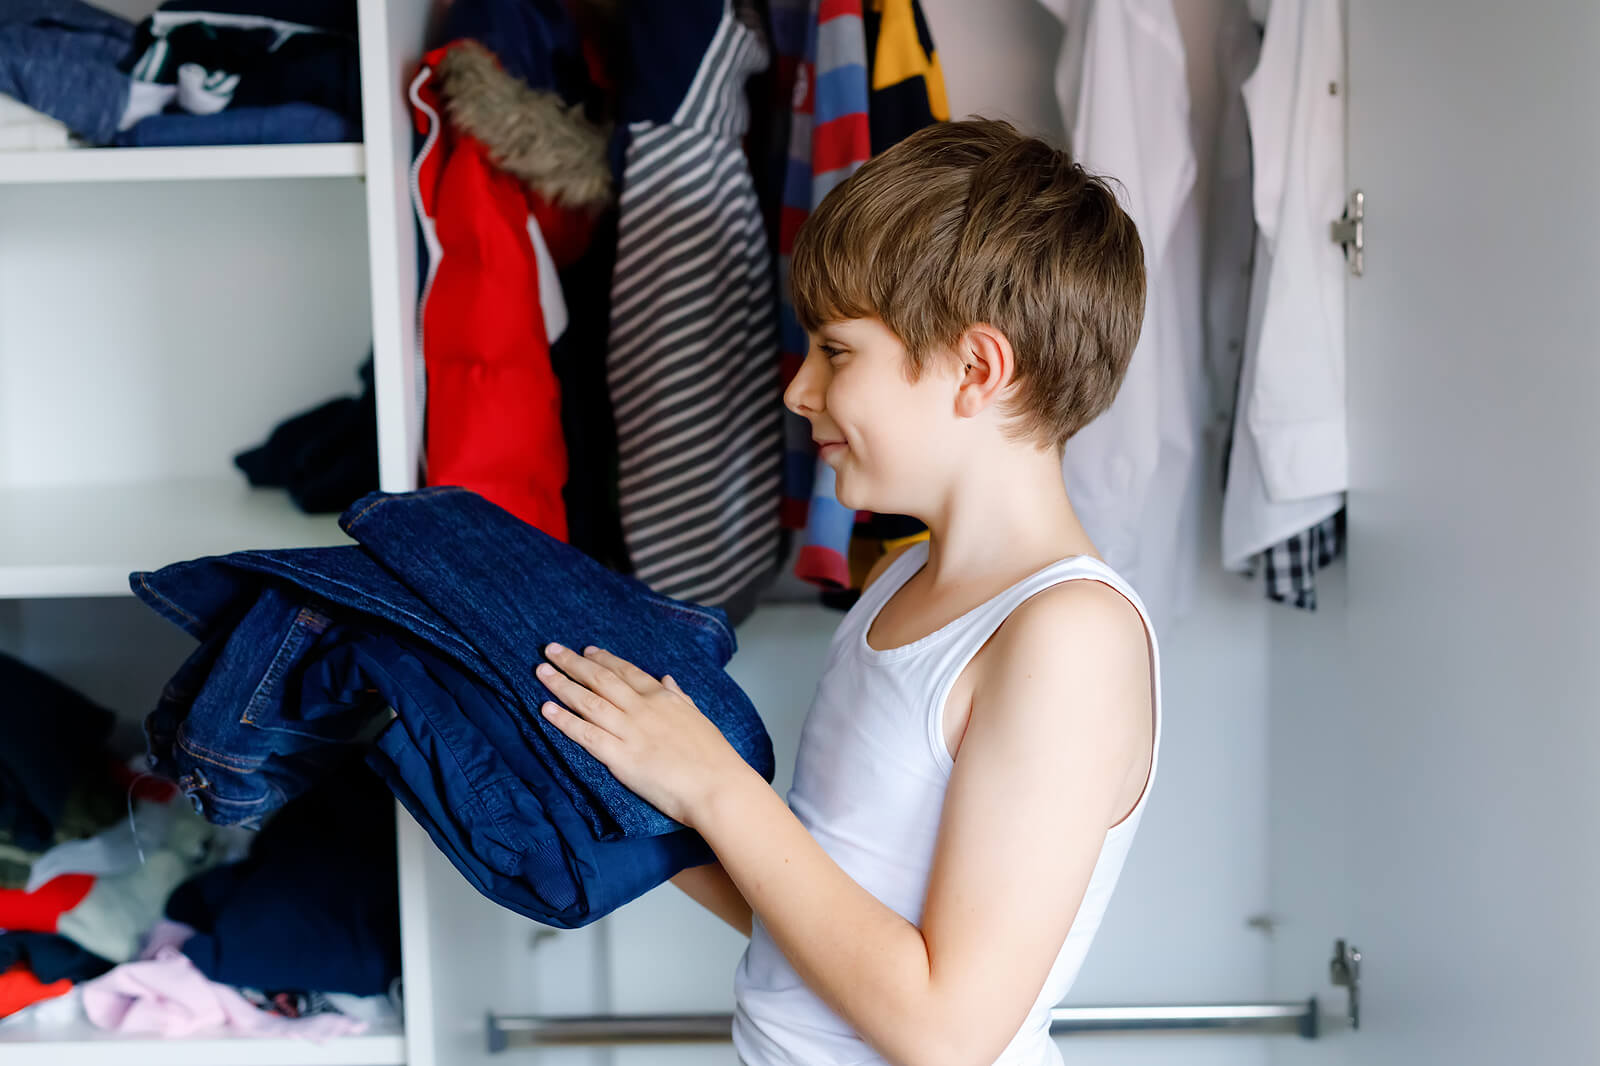 A preteen boy folding and putting away a pair of jeans.